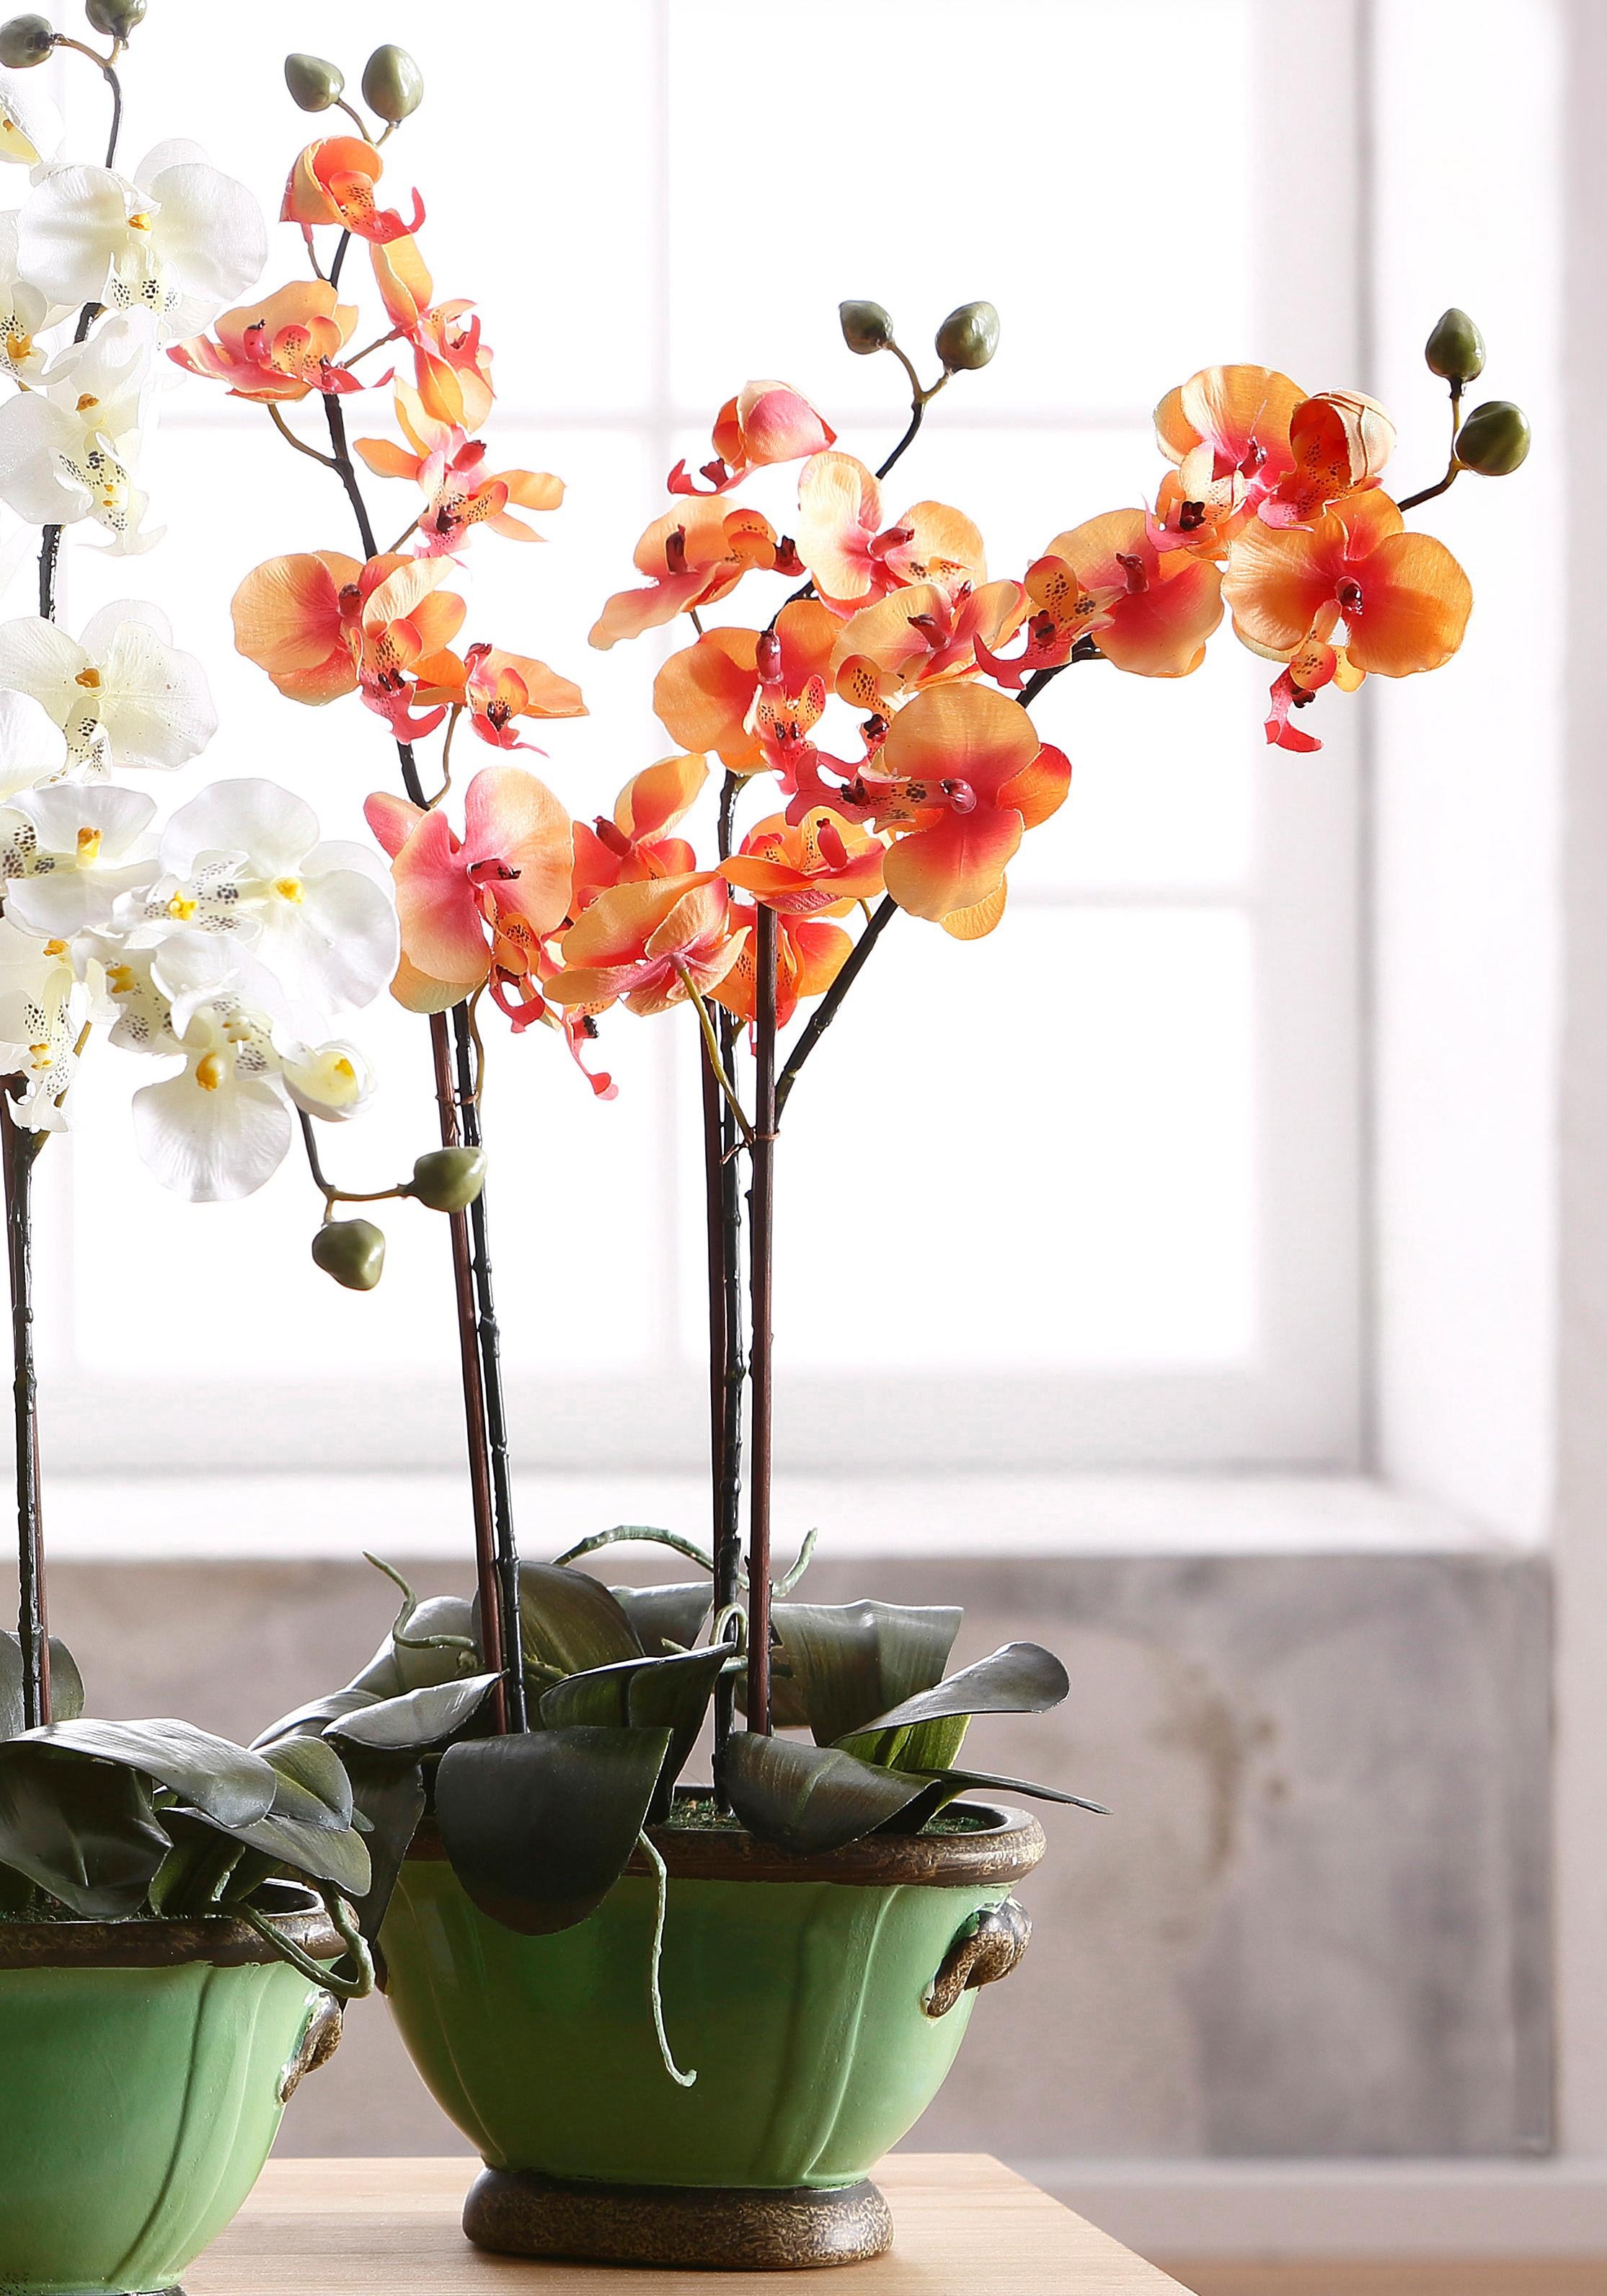 I.GE.A. Kunstpflanze »Orchidee«